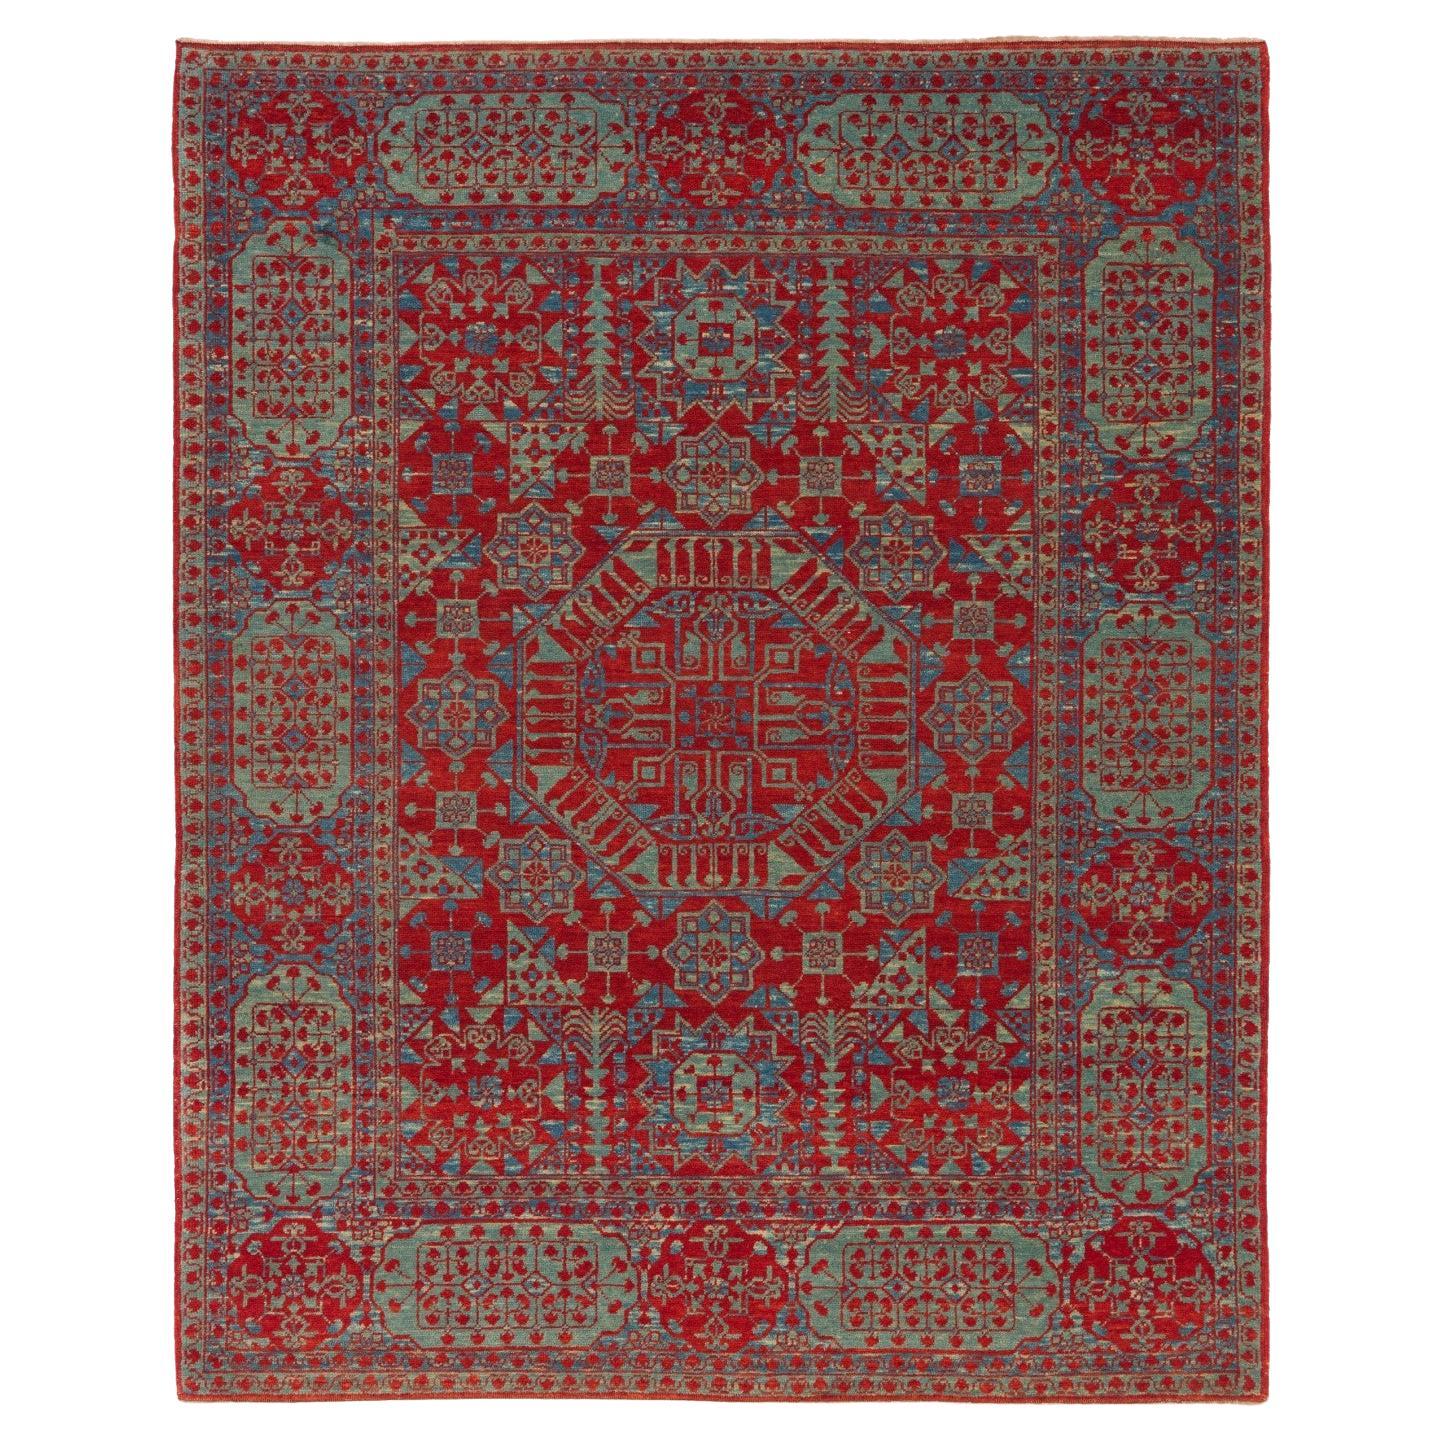 Ararat Rugs Mamluk Rug with Central Star 16th Cent. Revival Carpet Natural Dyed For Sale